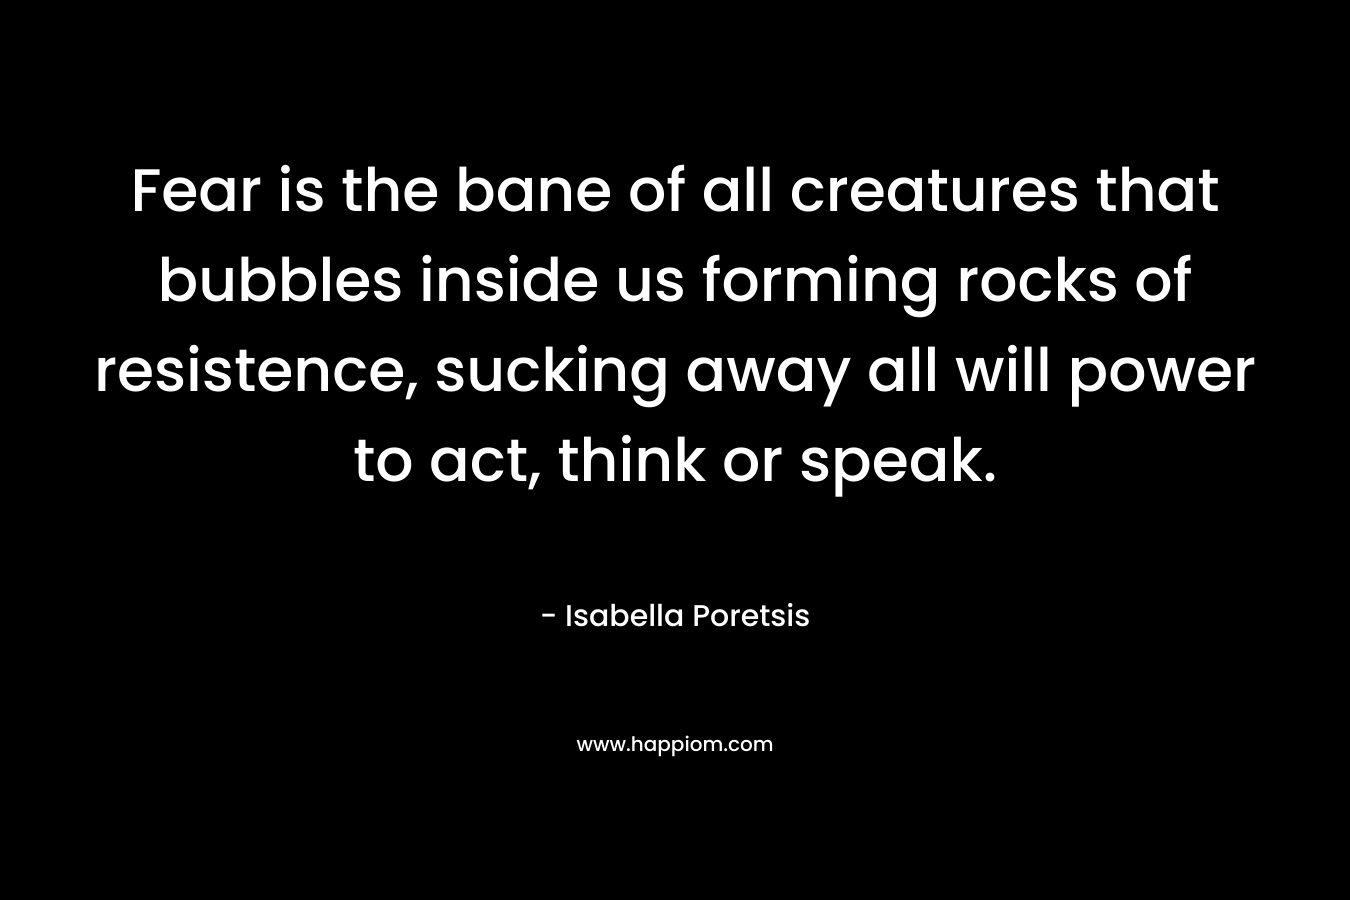 Fear is the bane of all creatures that bubbles inside us forming rocks of resistence, sucking away all will power to act, think or speak. – Isabella Poretsis